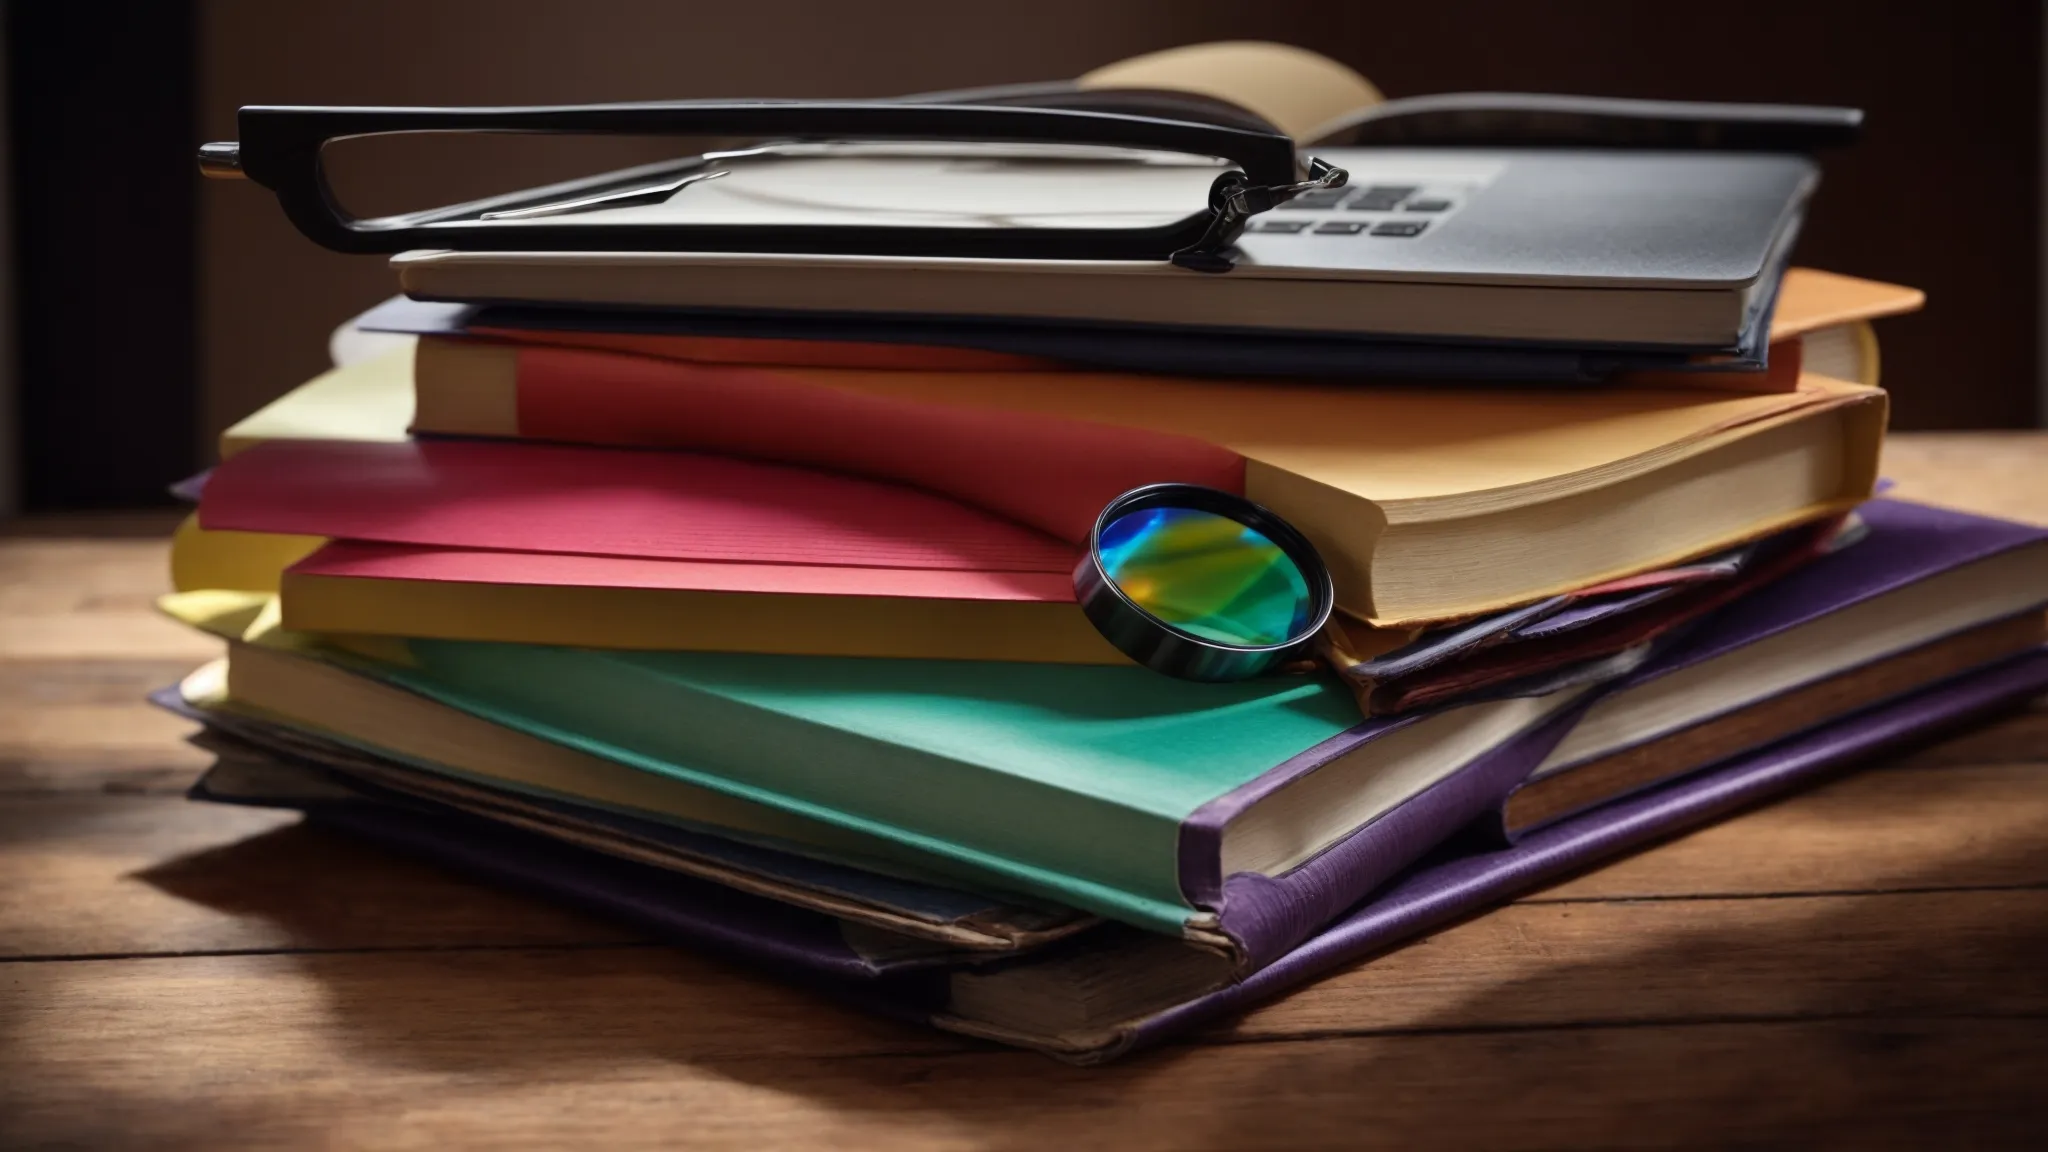 a stack of colorful books on a wooden desk with a laptop displaying a magnifying glass graphic on its screen.